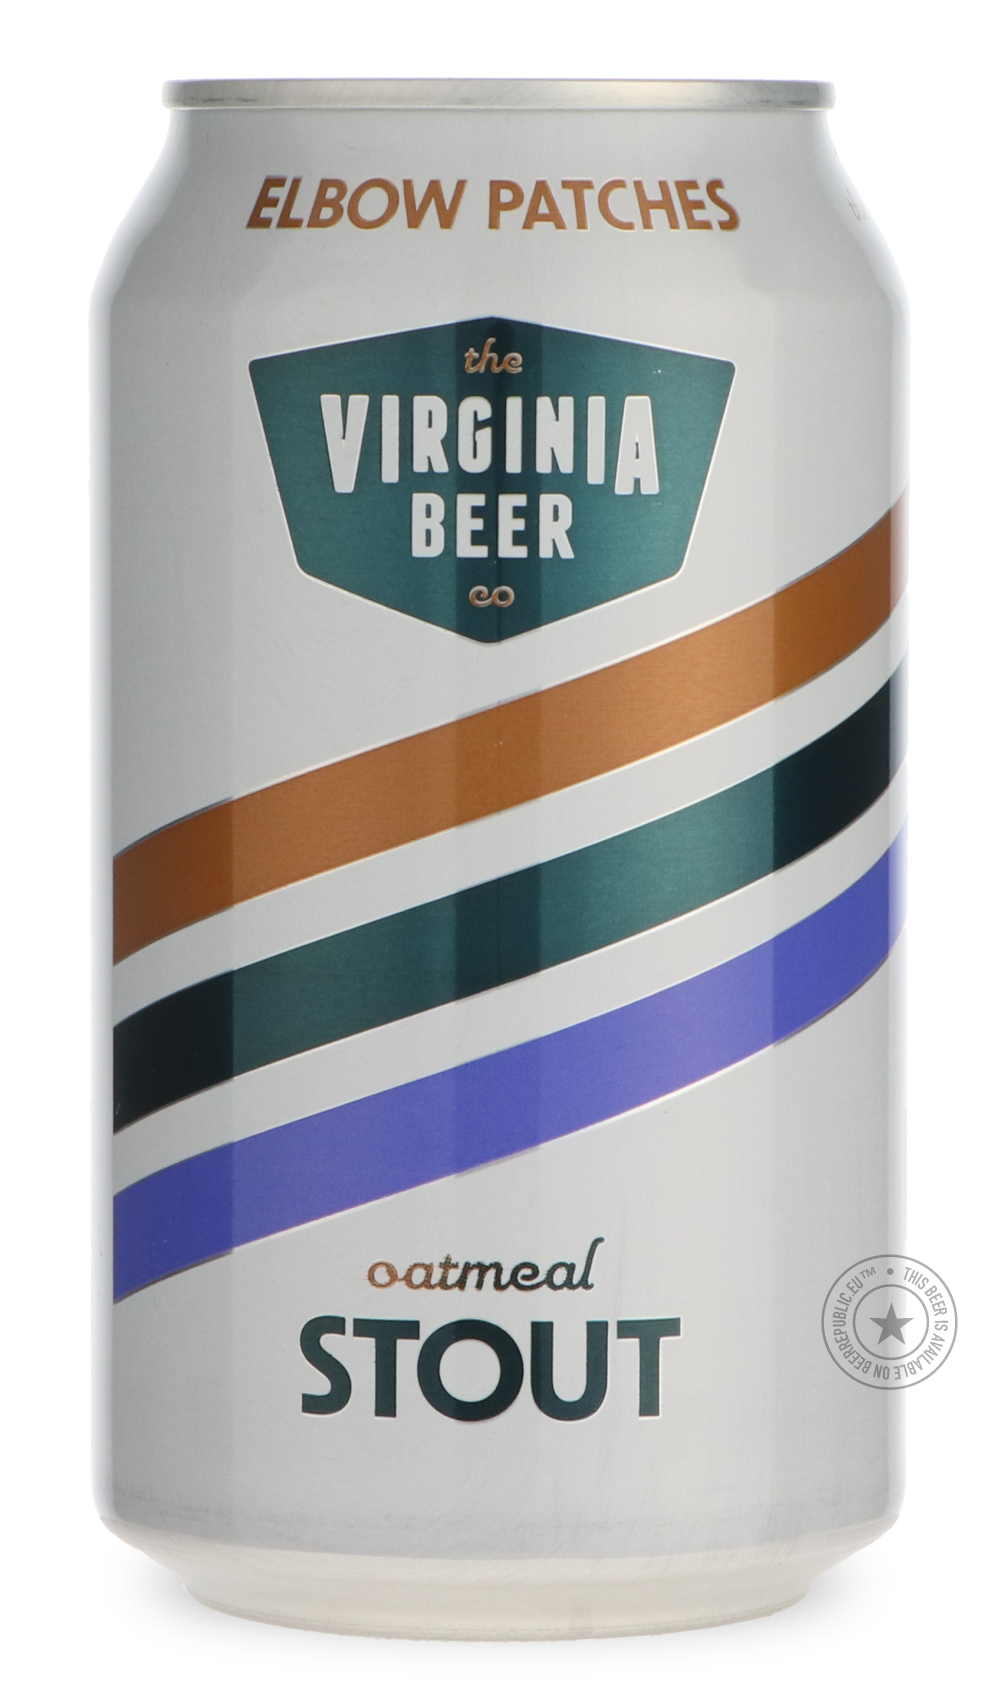 -The Virginia Beer Company- Elbow Patches-Stout & Porter- Only @ Beer Republic - The best online beer store for American & Canadian craft beer - Buy beer online from the USA and Canada - Bier online kopen - Amerikaans bier kopen - Craft beer store - Craft beer kopen - Amerikanisch bier kaufen - Bier online kaufen - Acheter biere online - IPA - Stout - Porter - New England IPA - Hazy IPA - Imperial Stout - Barrel Aged - Barrel Aged Imperial Stout - Brown - Dark beer - Blond - Blonde - Pilsner - Lager - Wheat